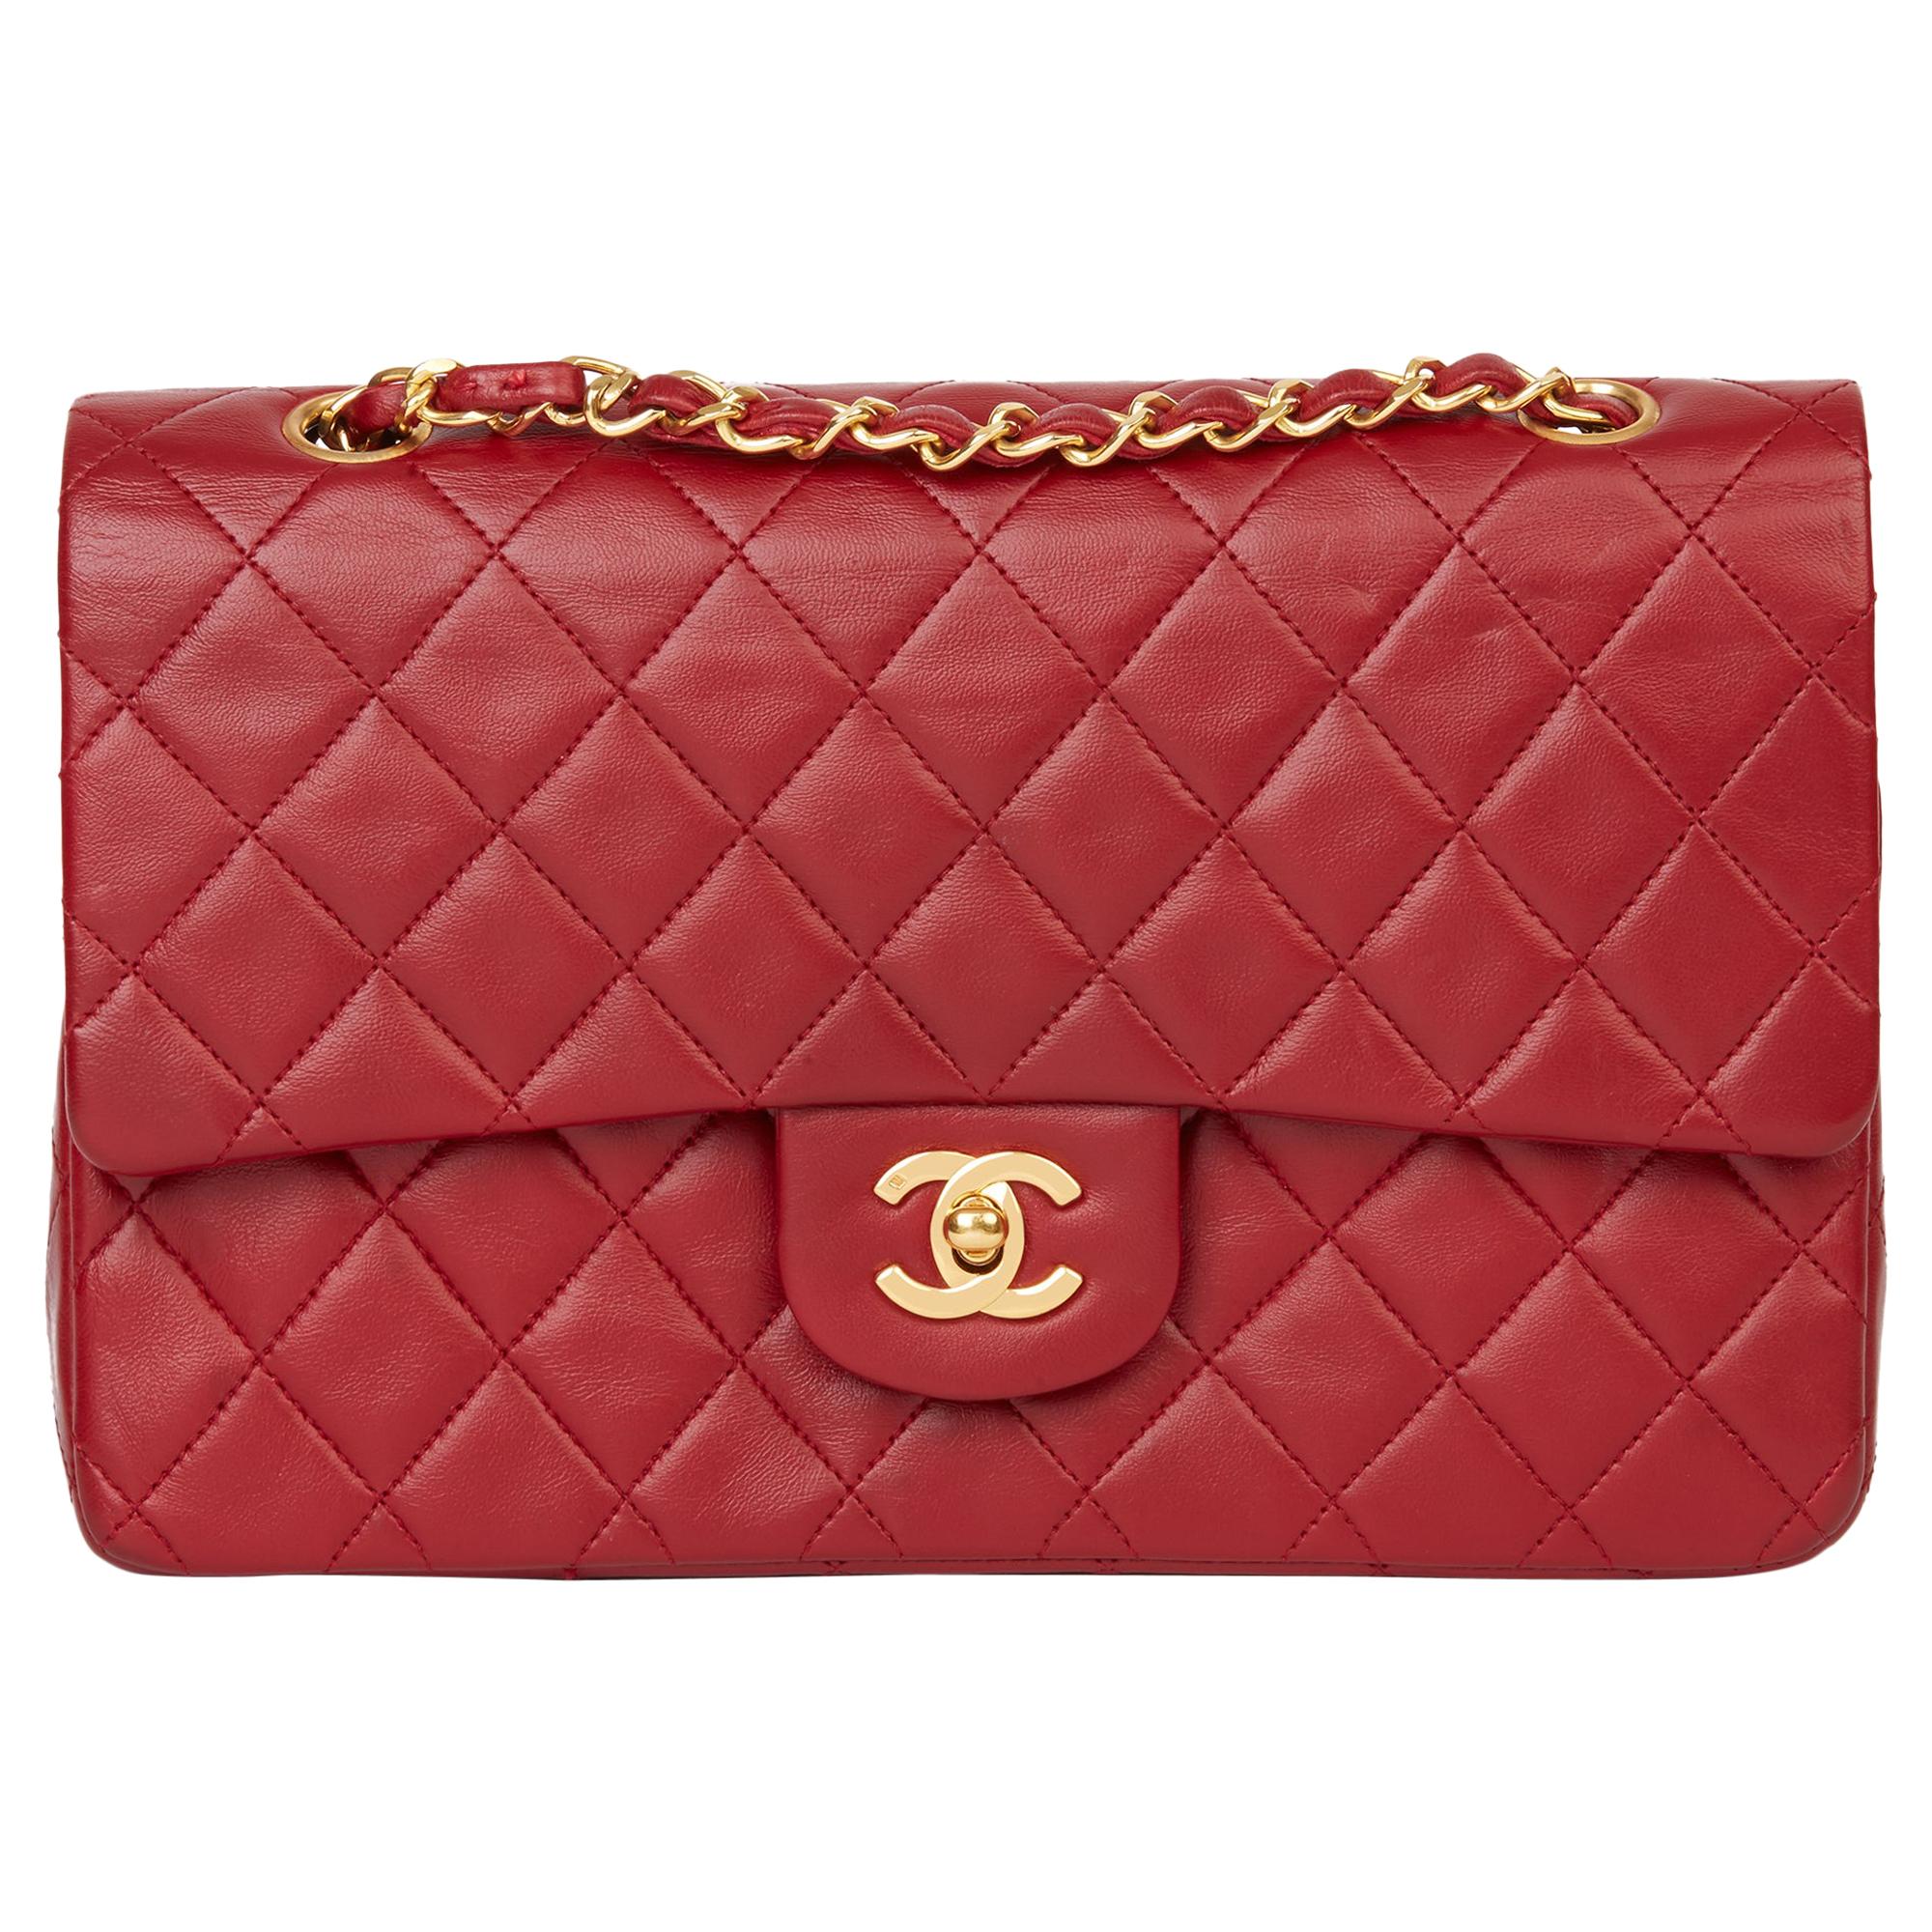 1991 Chanel Red Quilted Lambskin Vintage Medium Classic Double Flap Bag